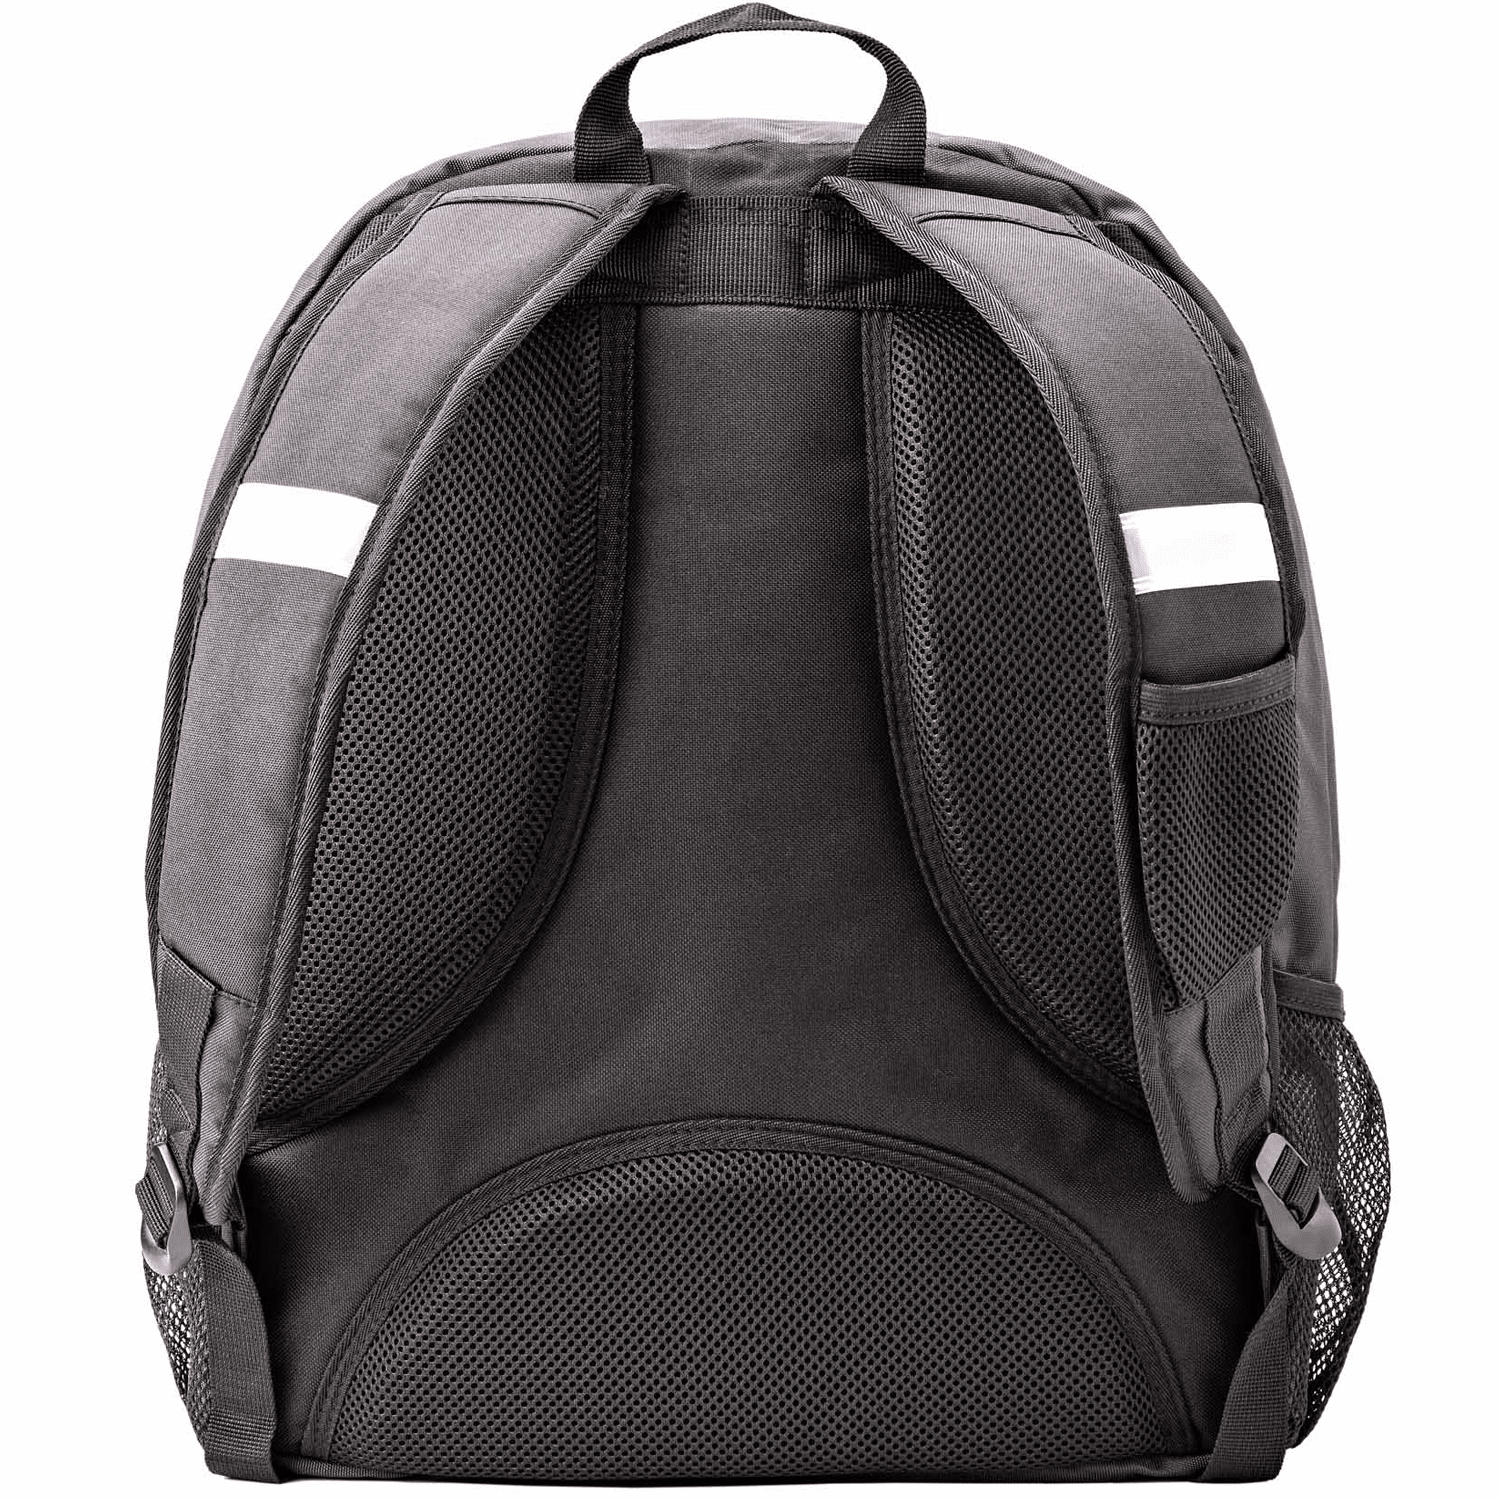 Sporthouse Student 2000 42L Backpack - Black/Grey 2 Shaws Department Stores